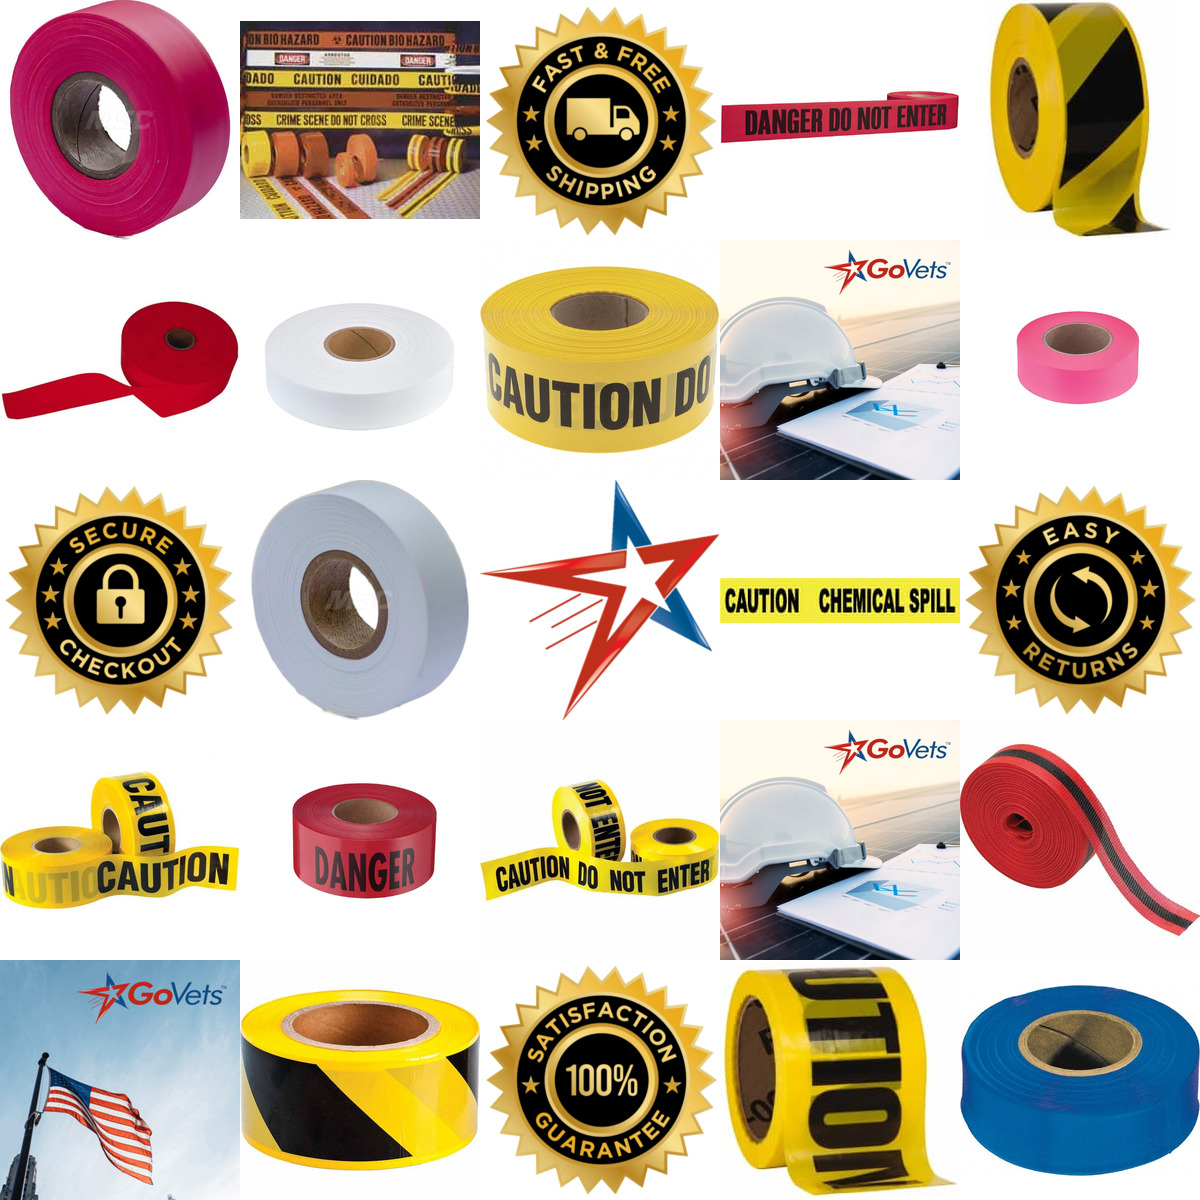 A selection of Barricade and Flagging Tape products on GoVets